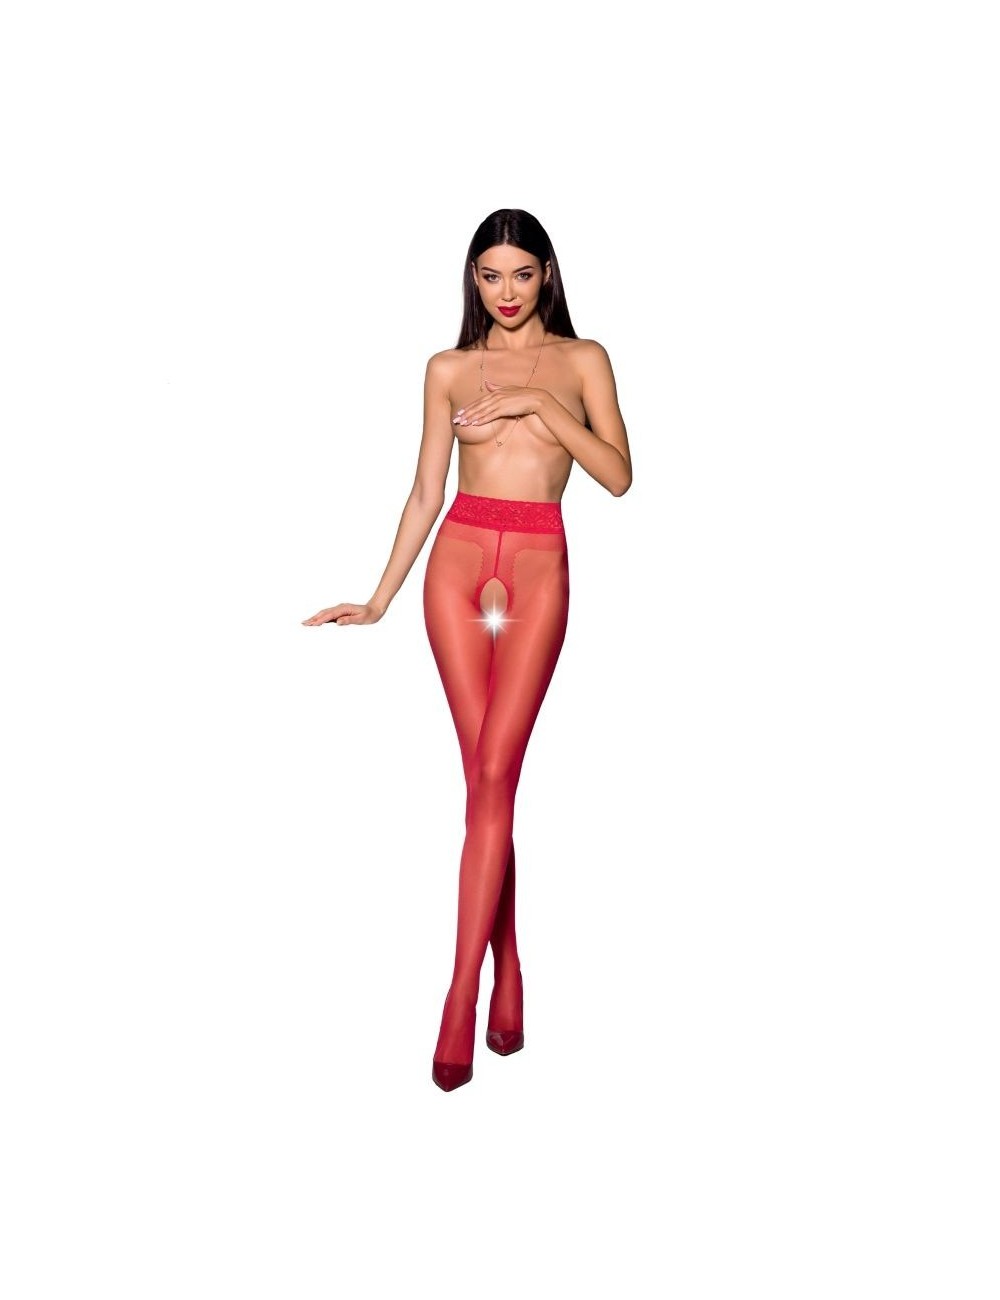 Lingerie - Bas - PASSION WOMAN TIOPEN 001 BAS ROUGE TAILLE 3/4 - PASSION WOMAN GARTER & STOCK